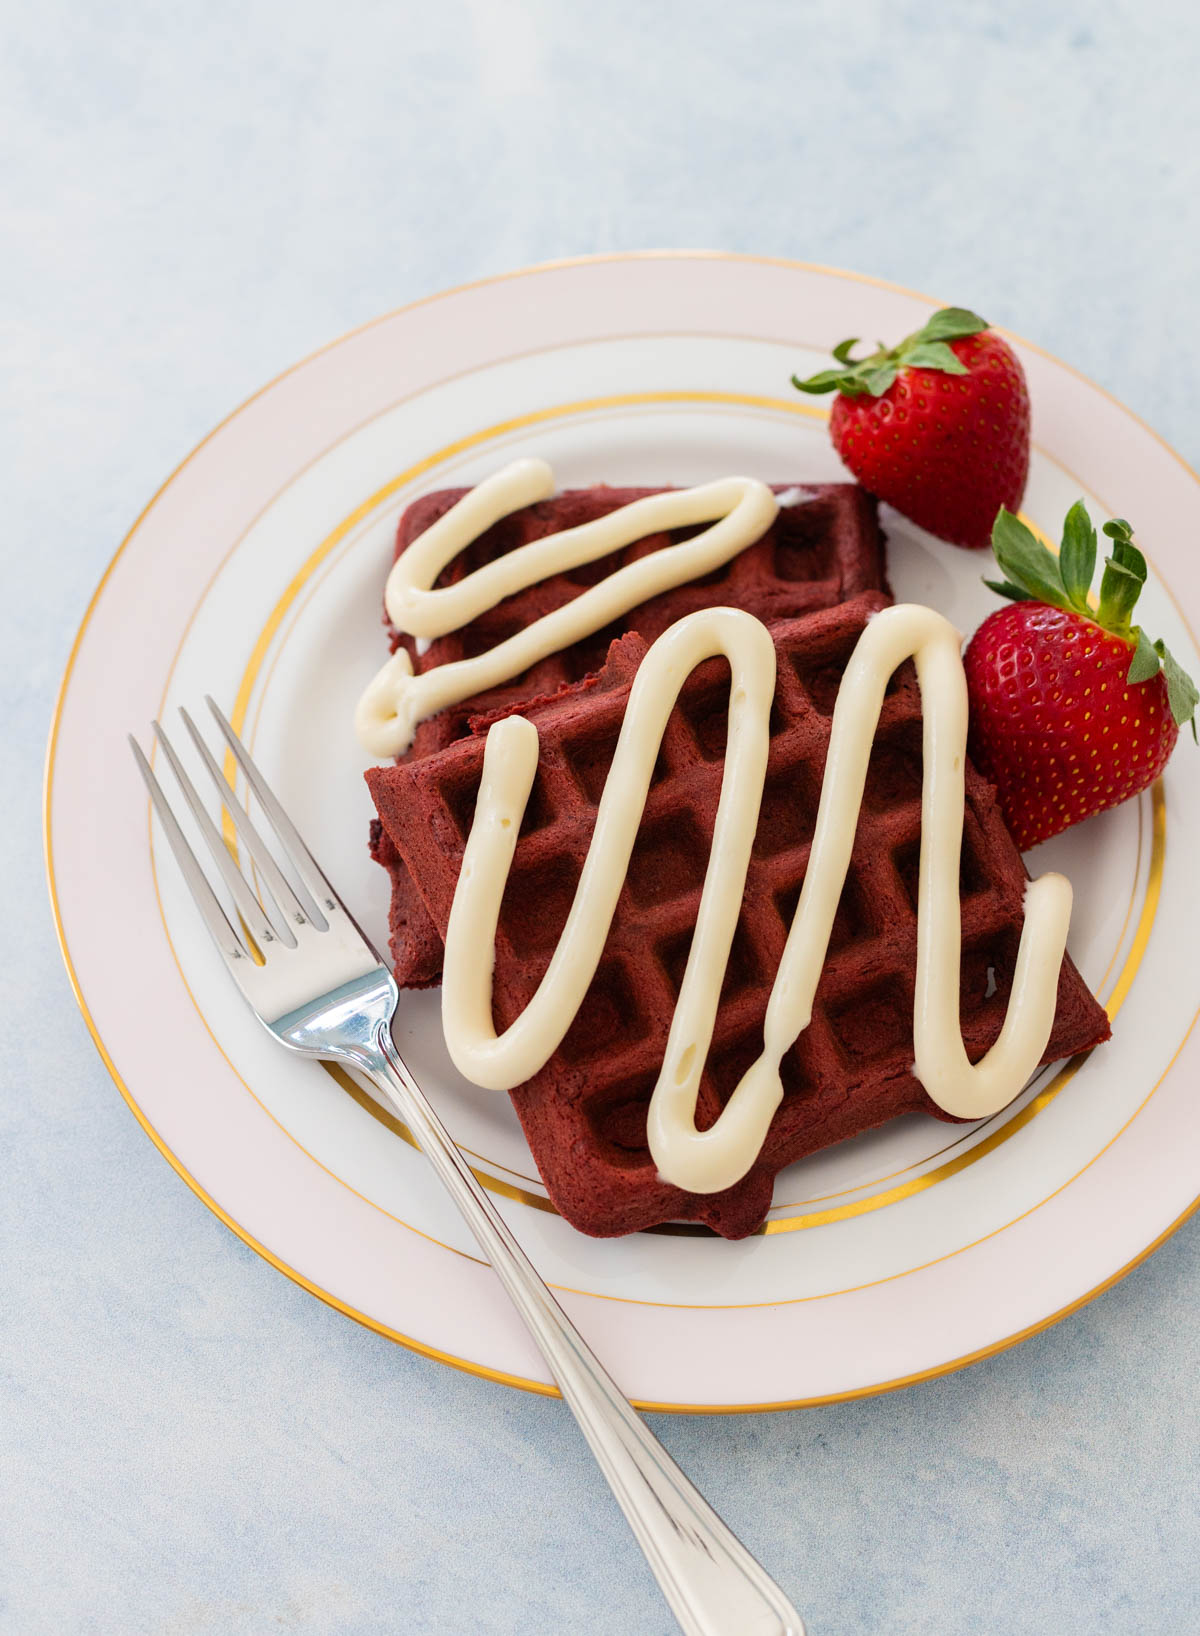 A plate of red velvet waffles has a drizzle of cream cheese icing and fresh strawberries on the side.